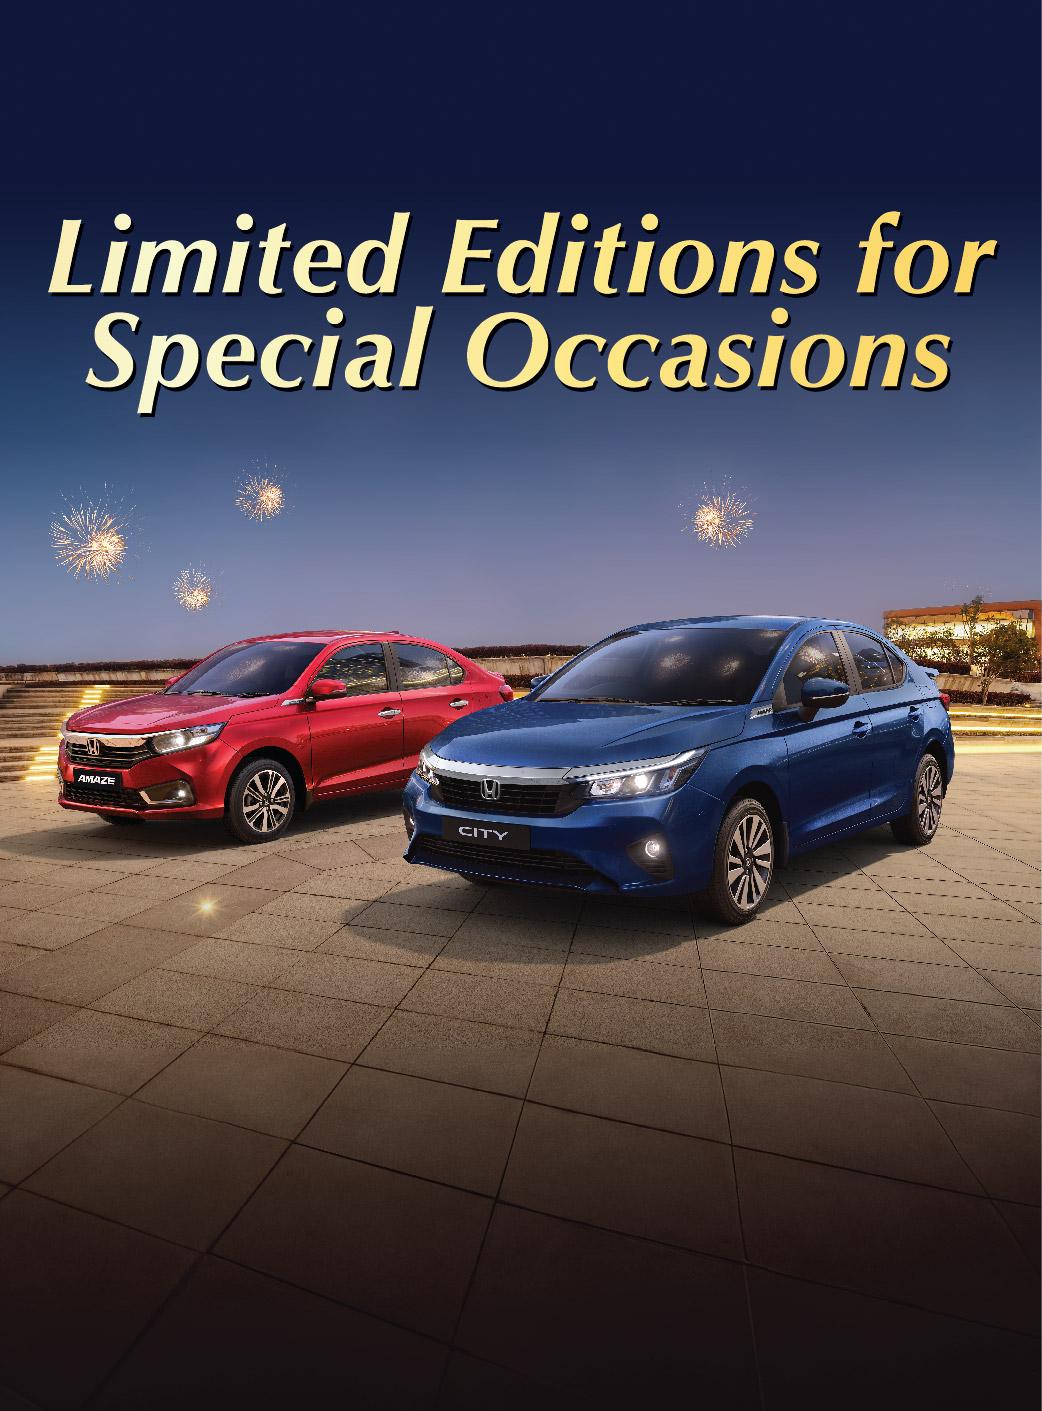 https://www.hondacarindia.com/_next/image?url=https%3A%2F%2Fwww.hondacarindia.com%2Fweb-data%2Fhome%2Fbanner%2FSpecial%20Occasions_Mobile.jpg&w=3840&q=75